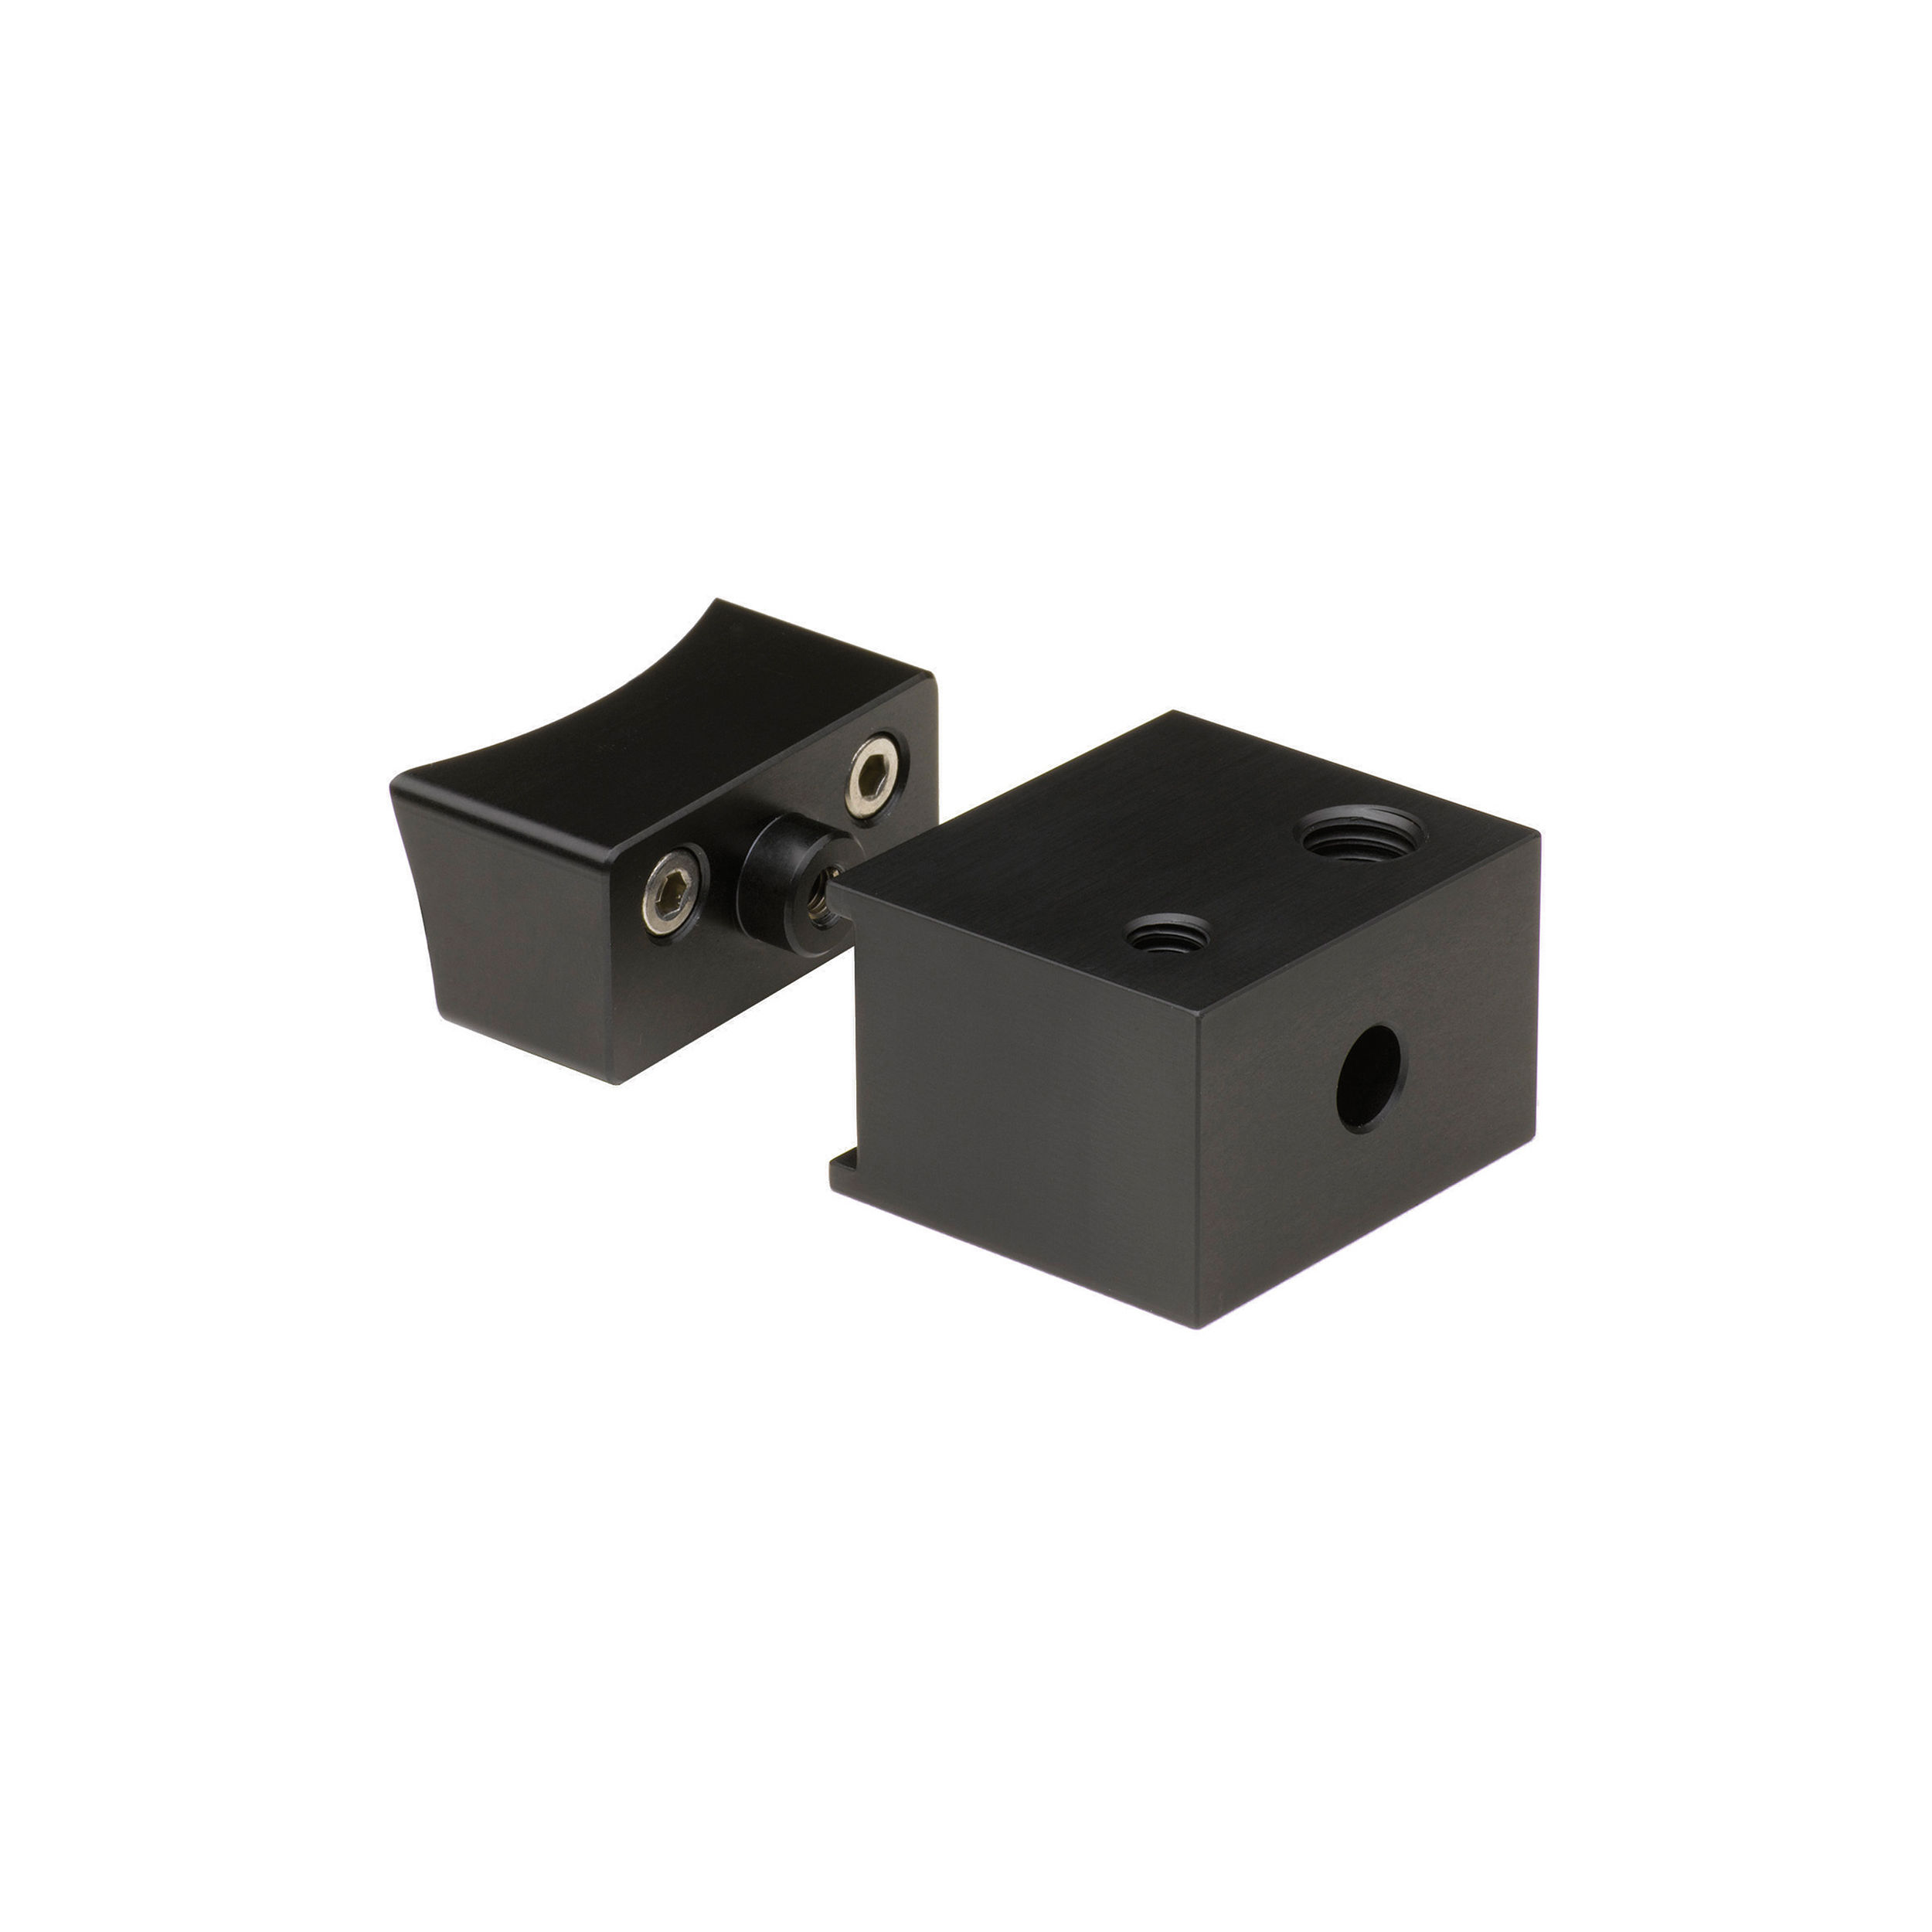 MILLER Accessory Mounting Block to suit AX & Arrow Fluid Heads